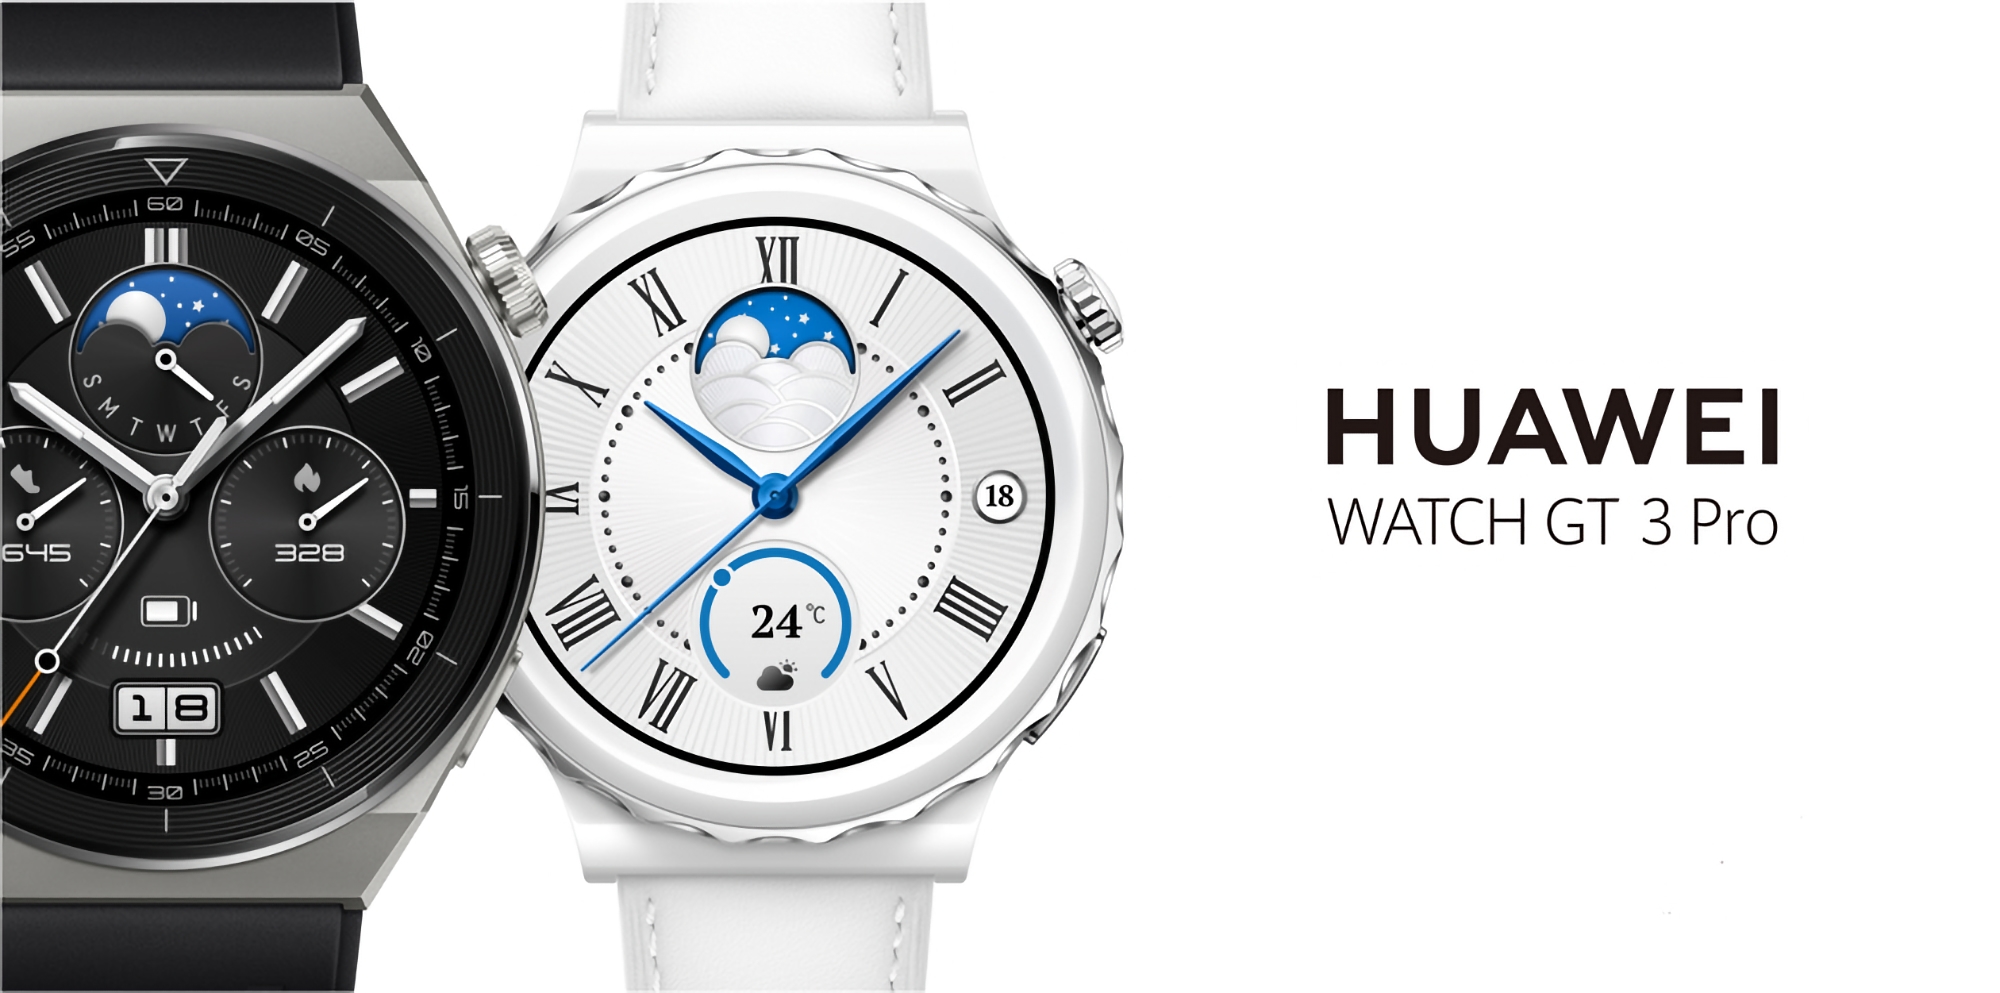 Global Huawei Watch GT 3 Pro users have started receiving the HarmonyOS 4 update